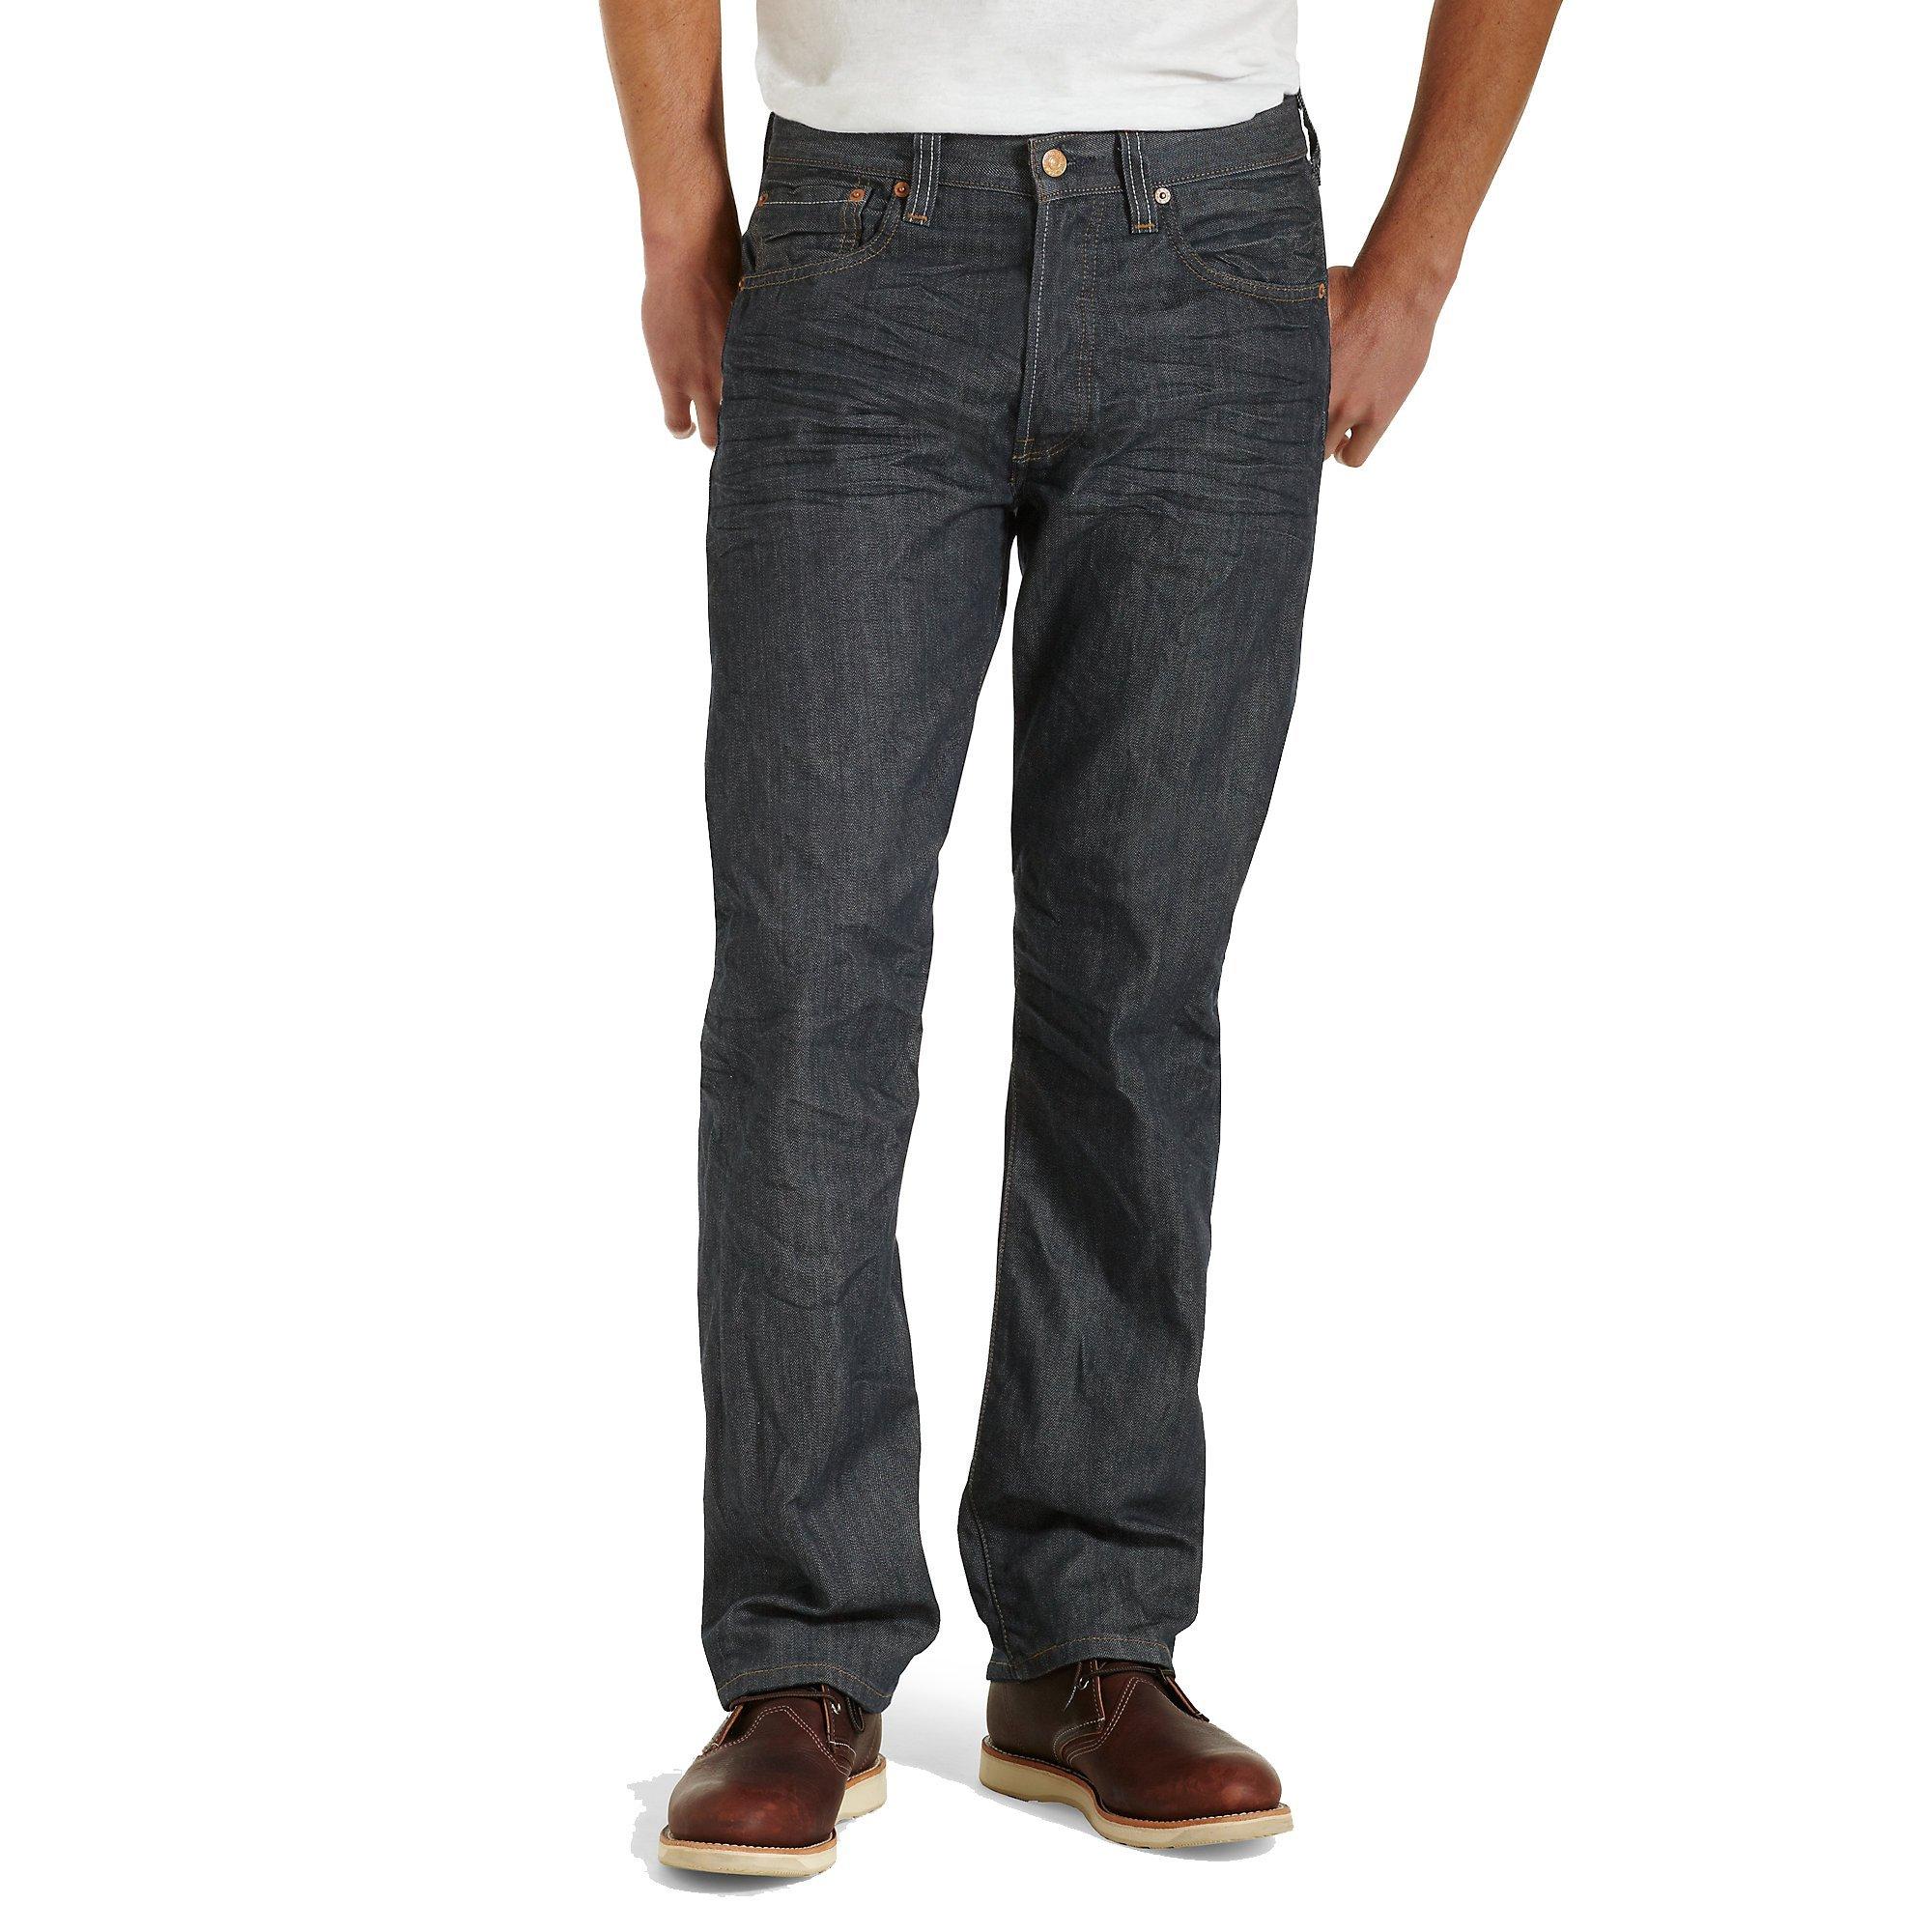 Dylan Slim-Fit Jeans for Tall Men in New Fade 40 / 36 / New Fade